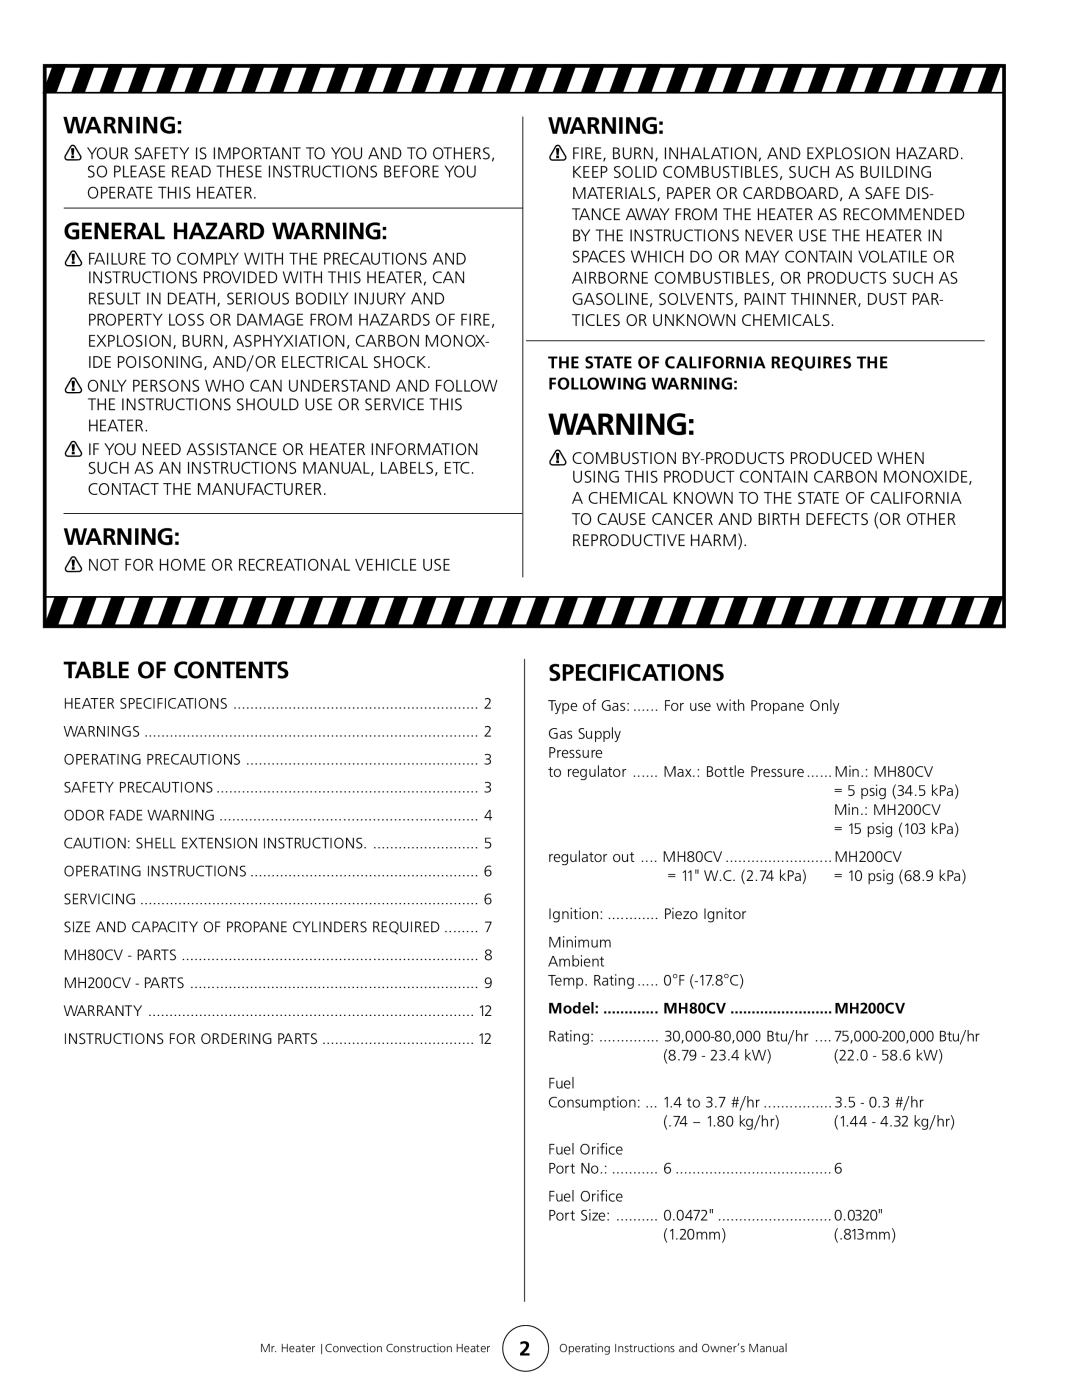 Enerco MH80CV, MH200CV operating instructions General Hazard Warning, Table Of Contents, Specifications 